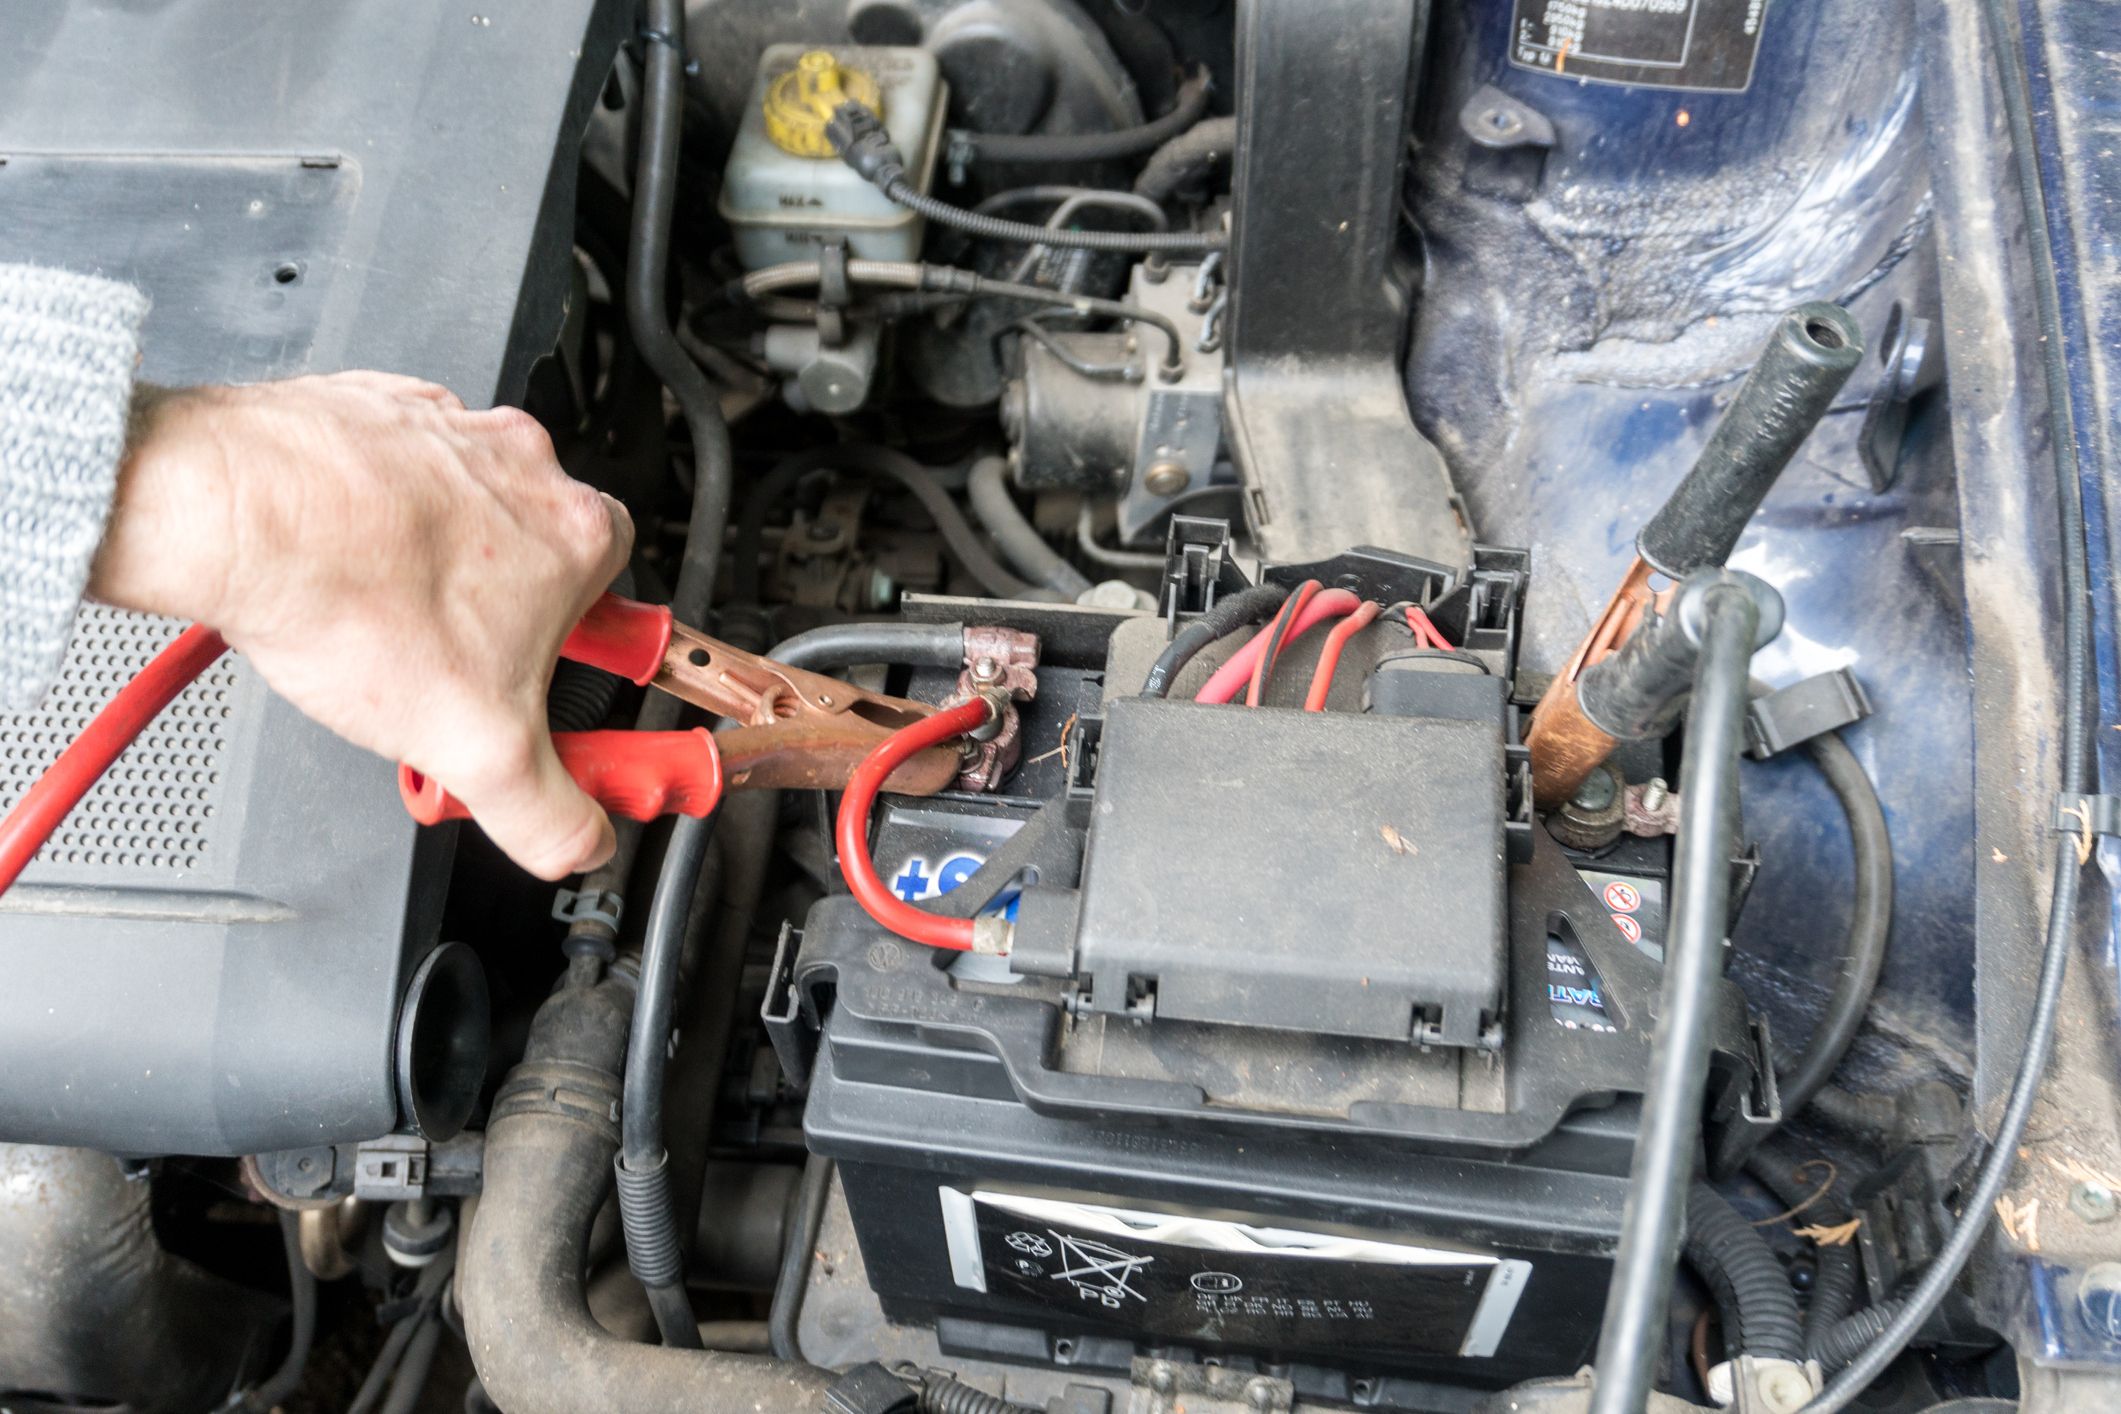 Land Rover Service Tips: How to Jump Start a Car